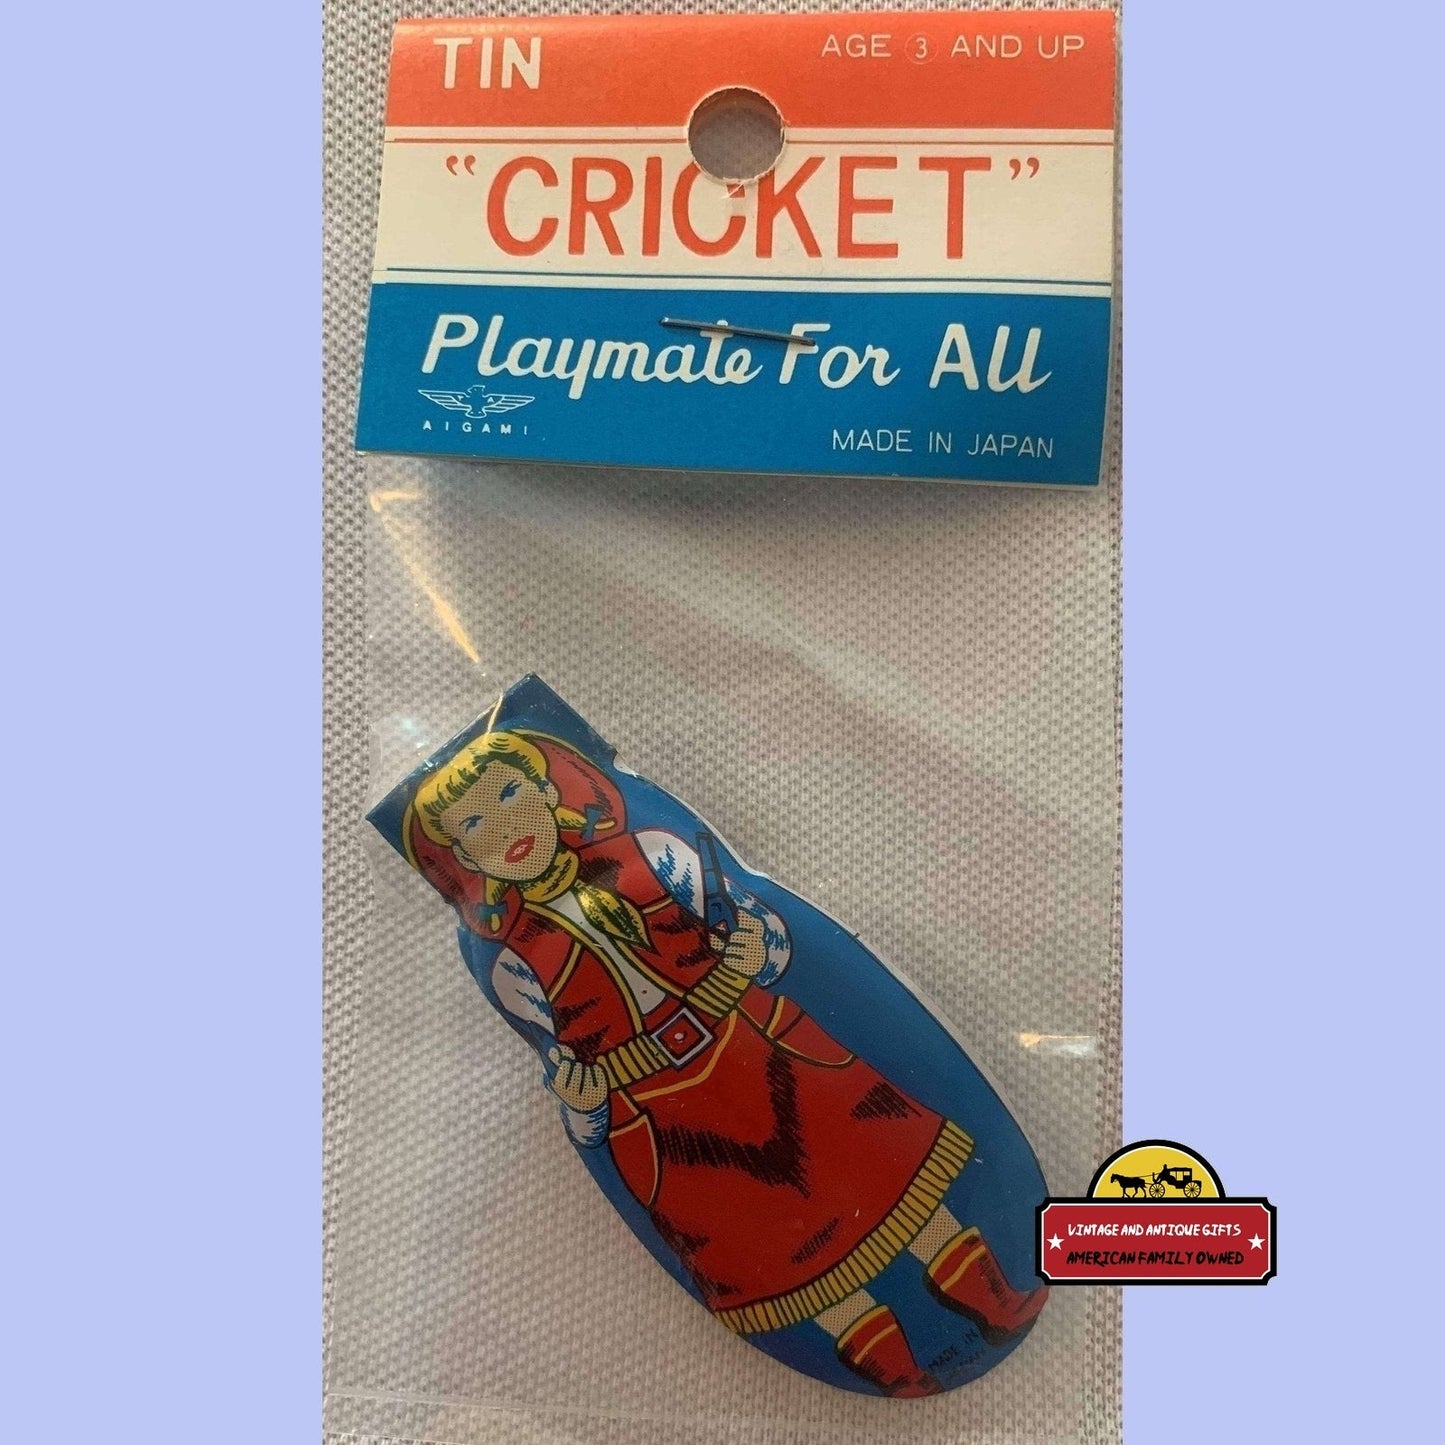 Vintage Cowgirl Tin Clicker Cricket 1950s Original Packaging! - Advertisements - Antique Misc. Collectibles